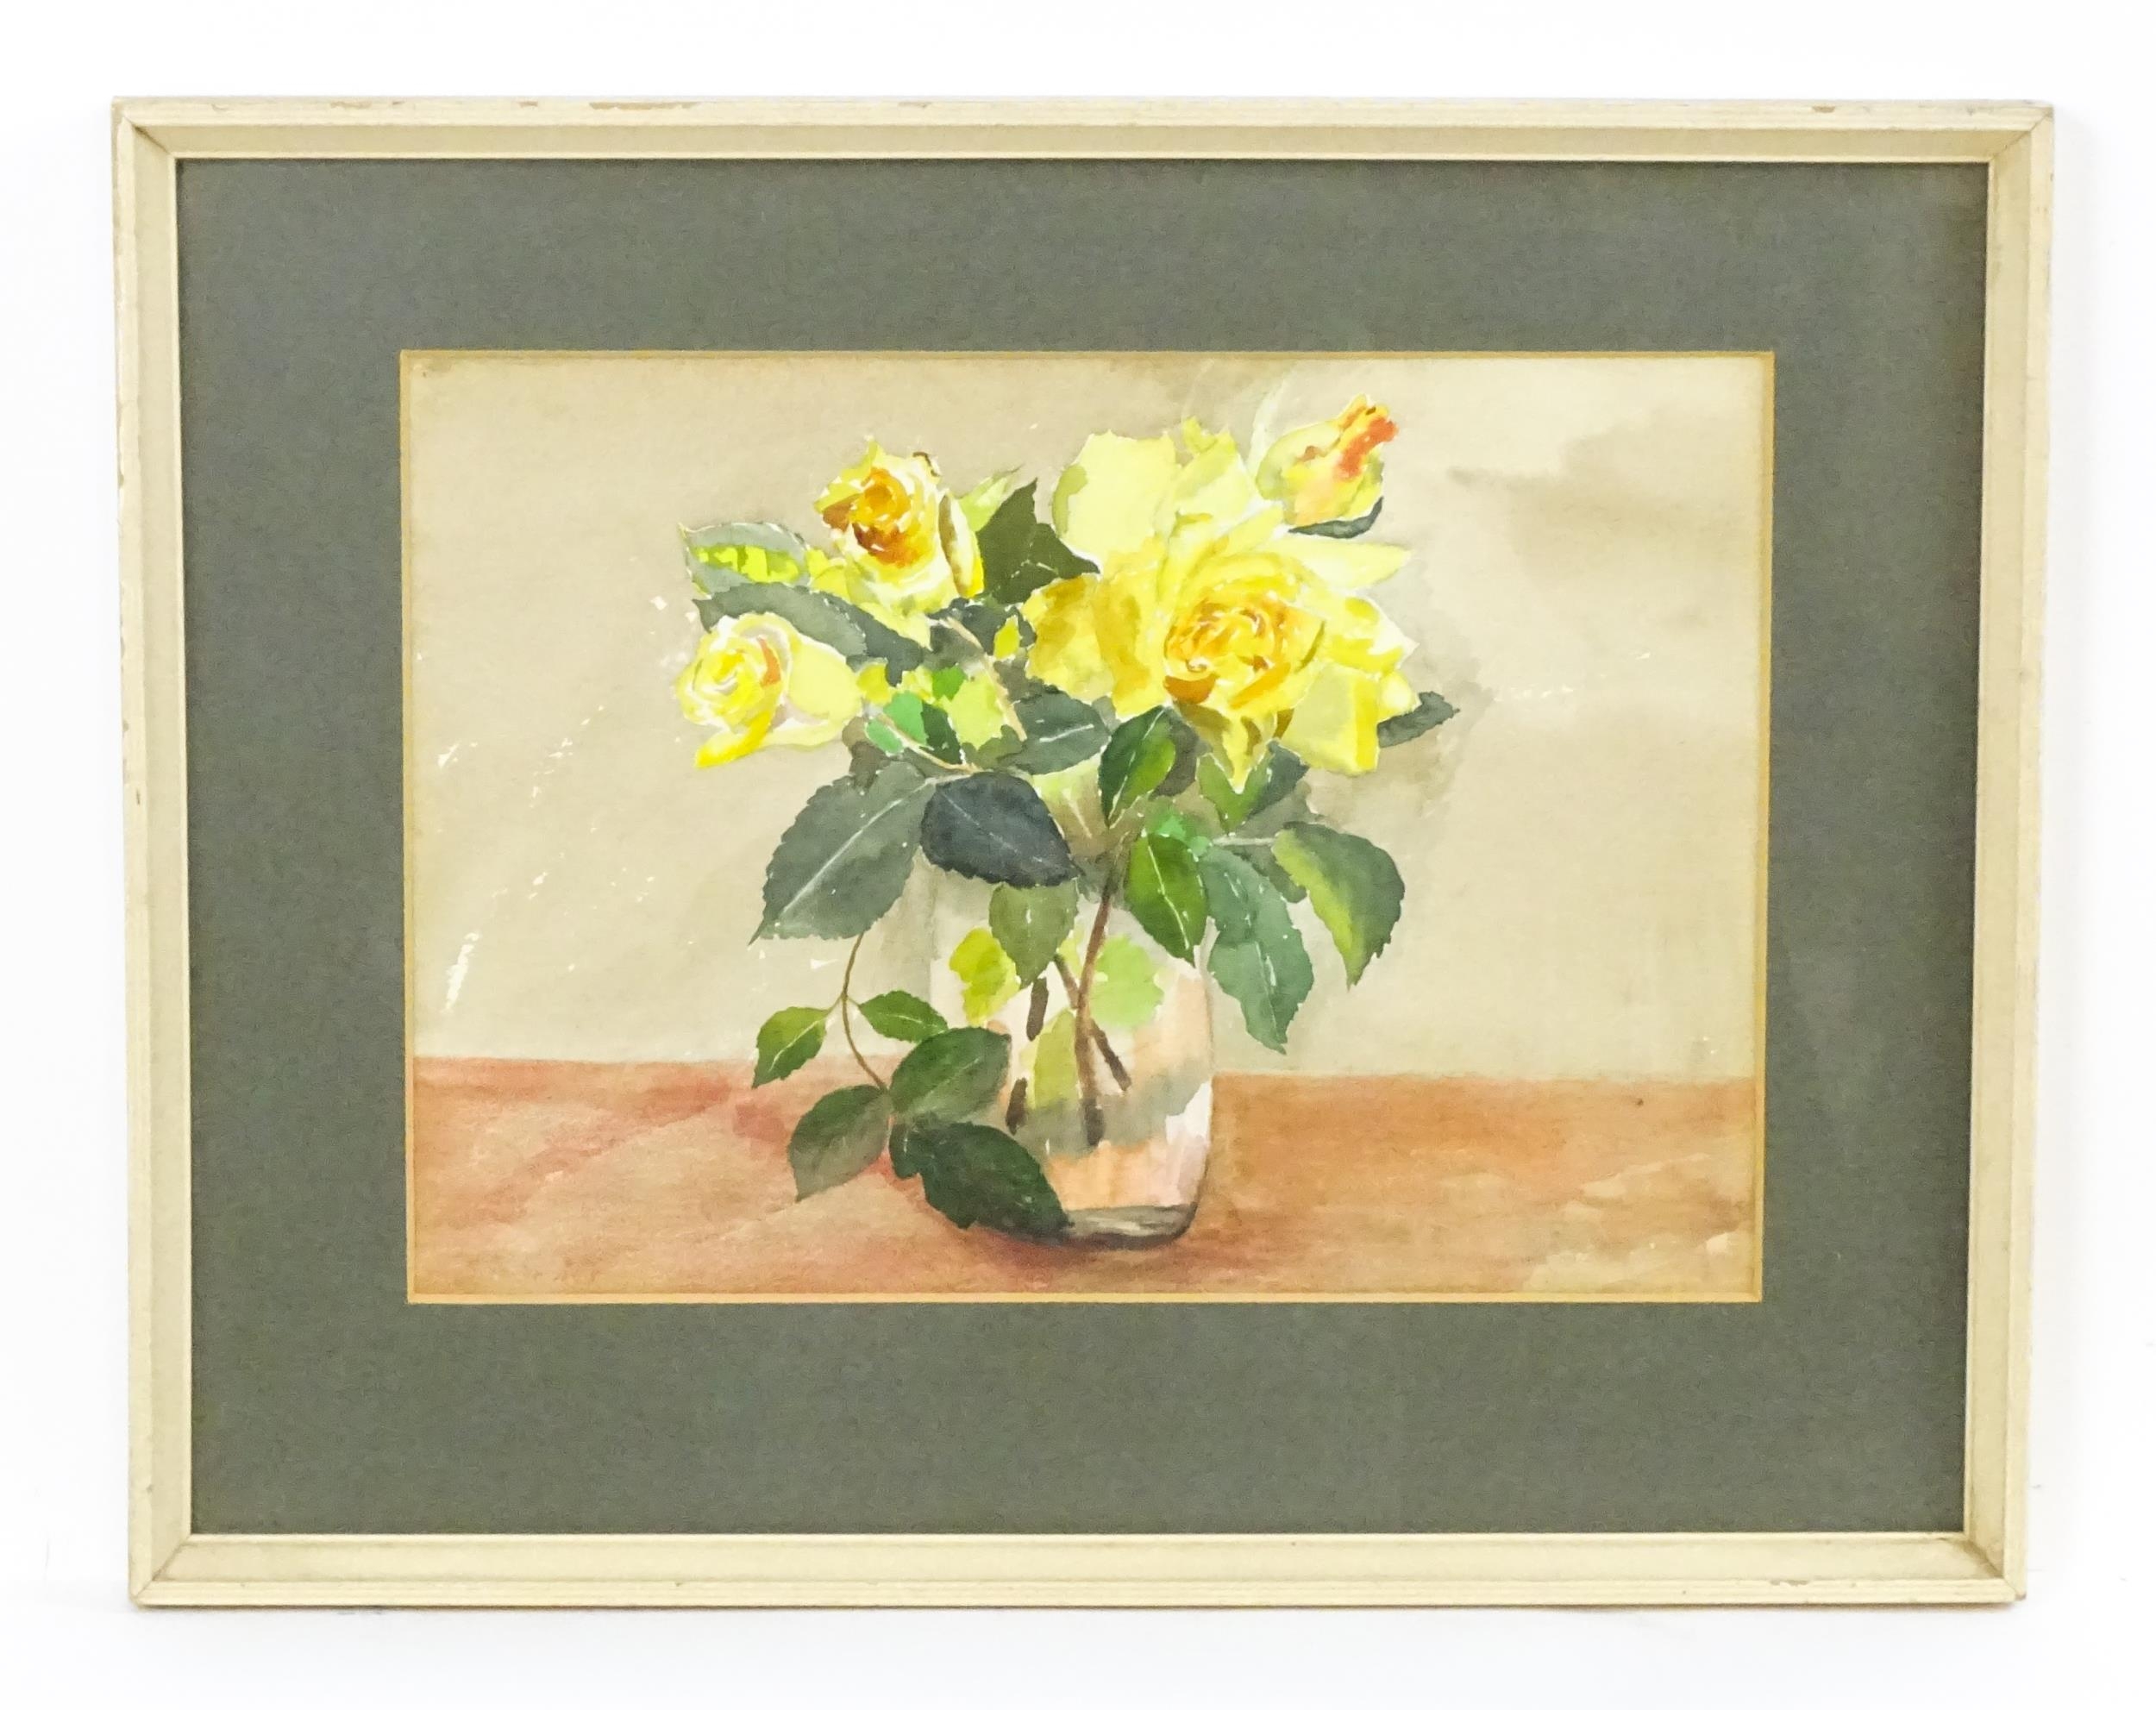 20th century, Watercolour, A still life study of yellow roses in a glass vase. Indistinctly signed